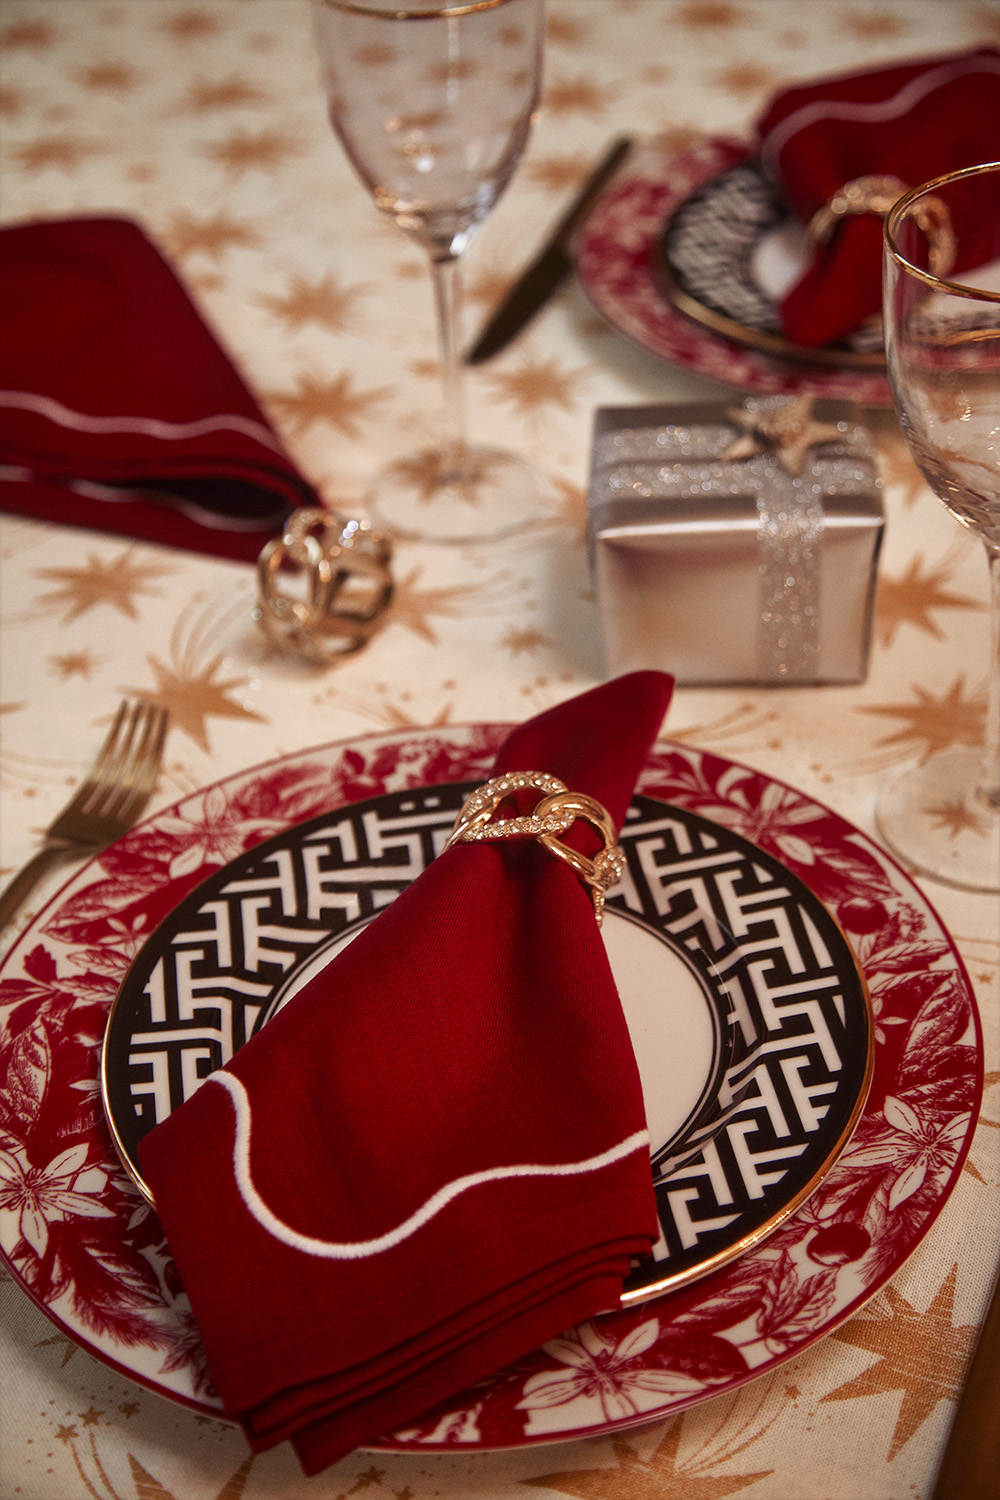 H&M HOME's Guide to a Royal Holiday Table Setting